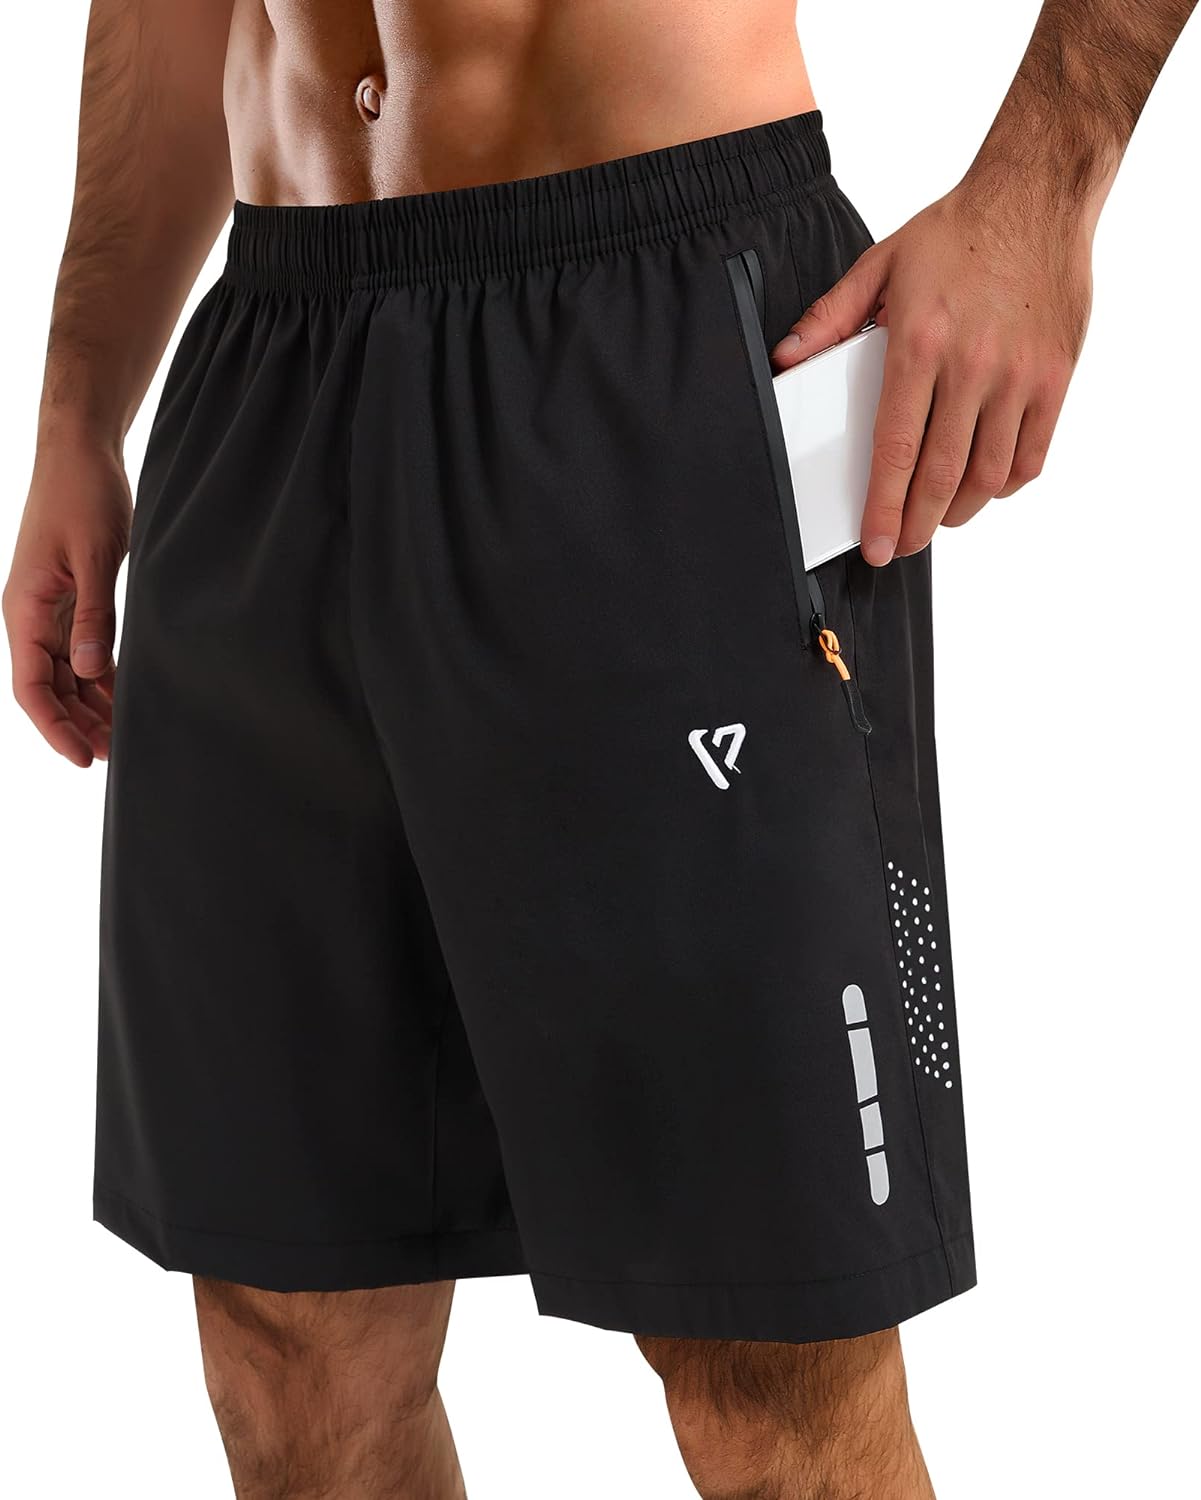 FIONECA Mens Athletic Shorts Quick Dry, Lightweight Running Shorts for Men with Pocket Workout Gym Shorts for Men Training